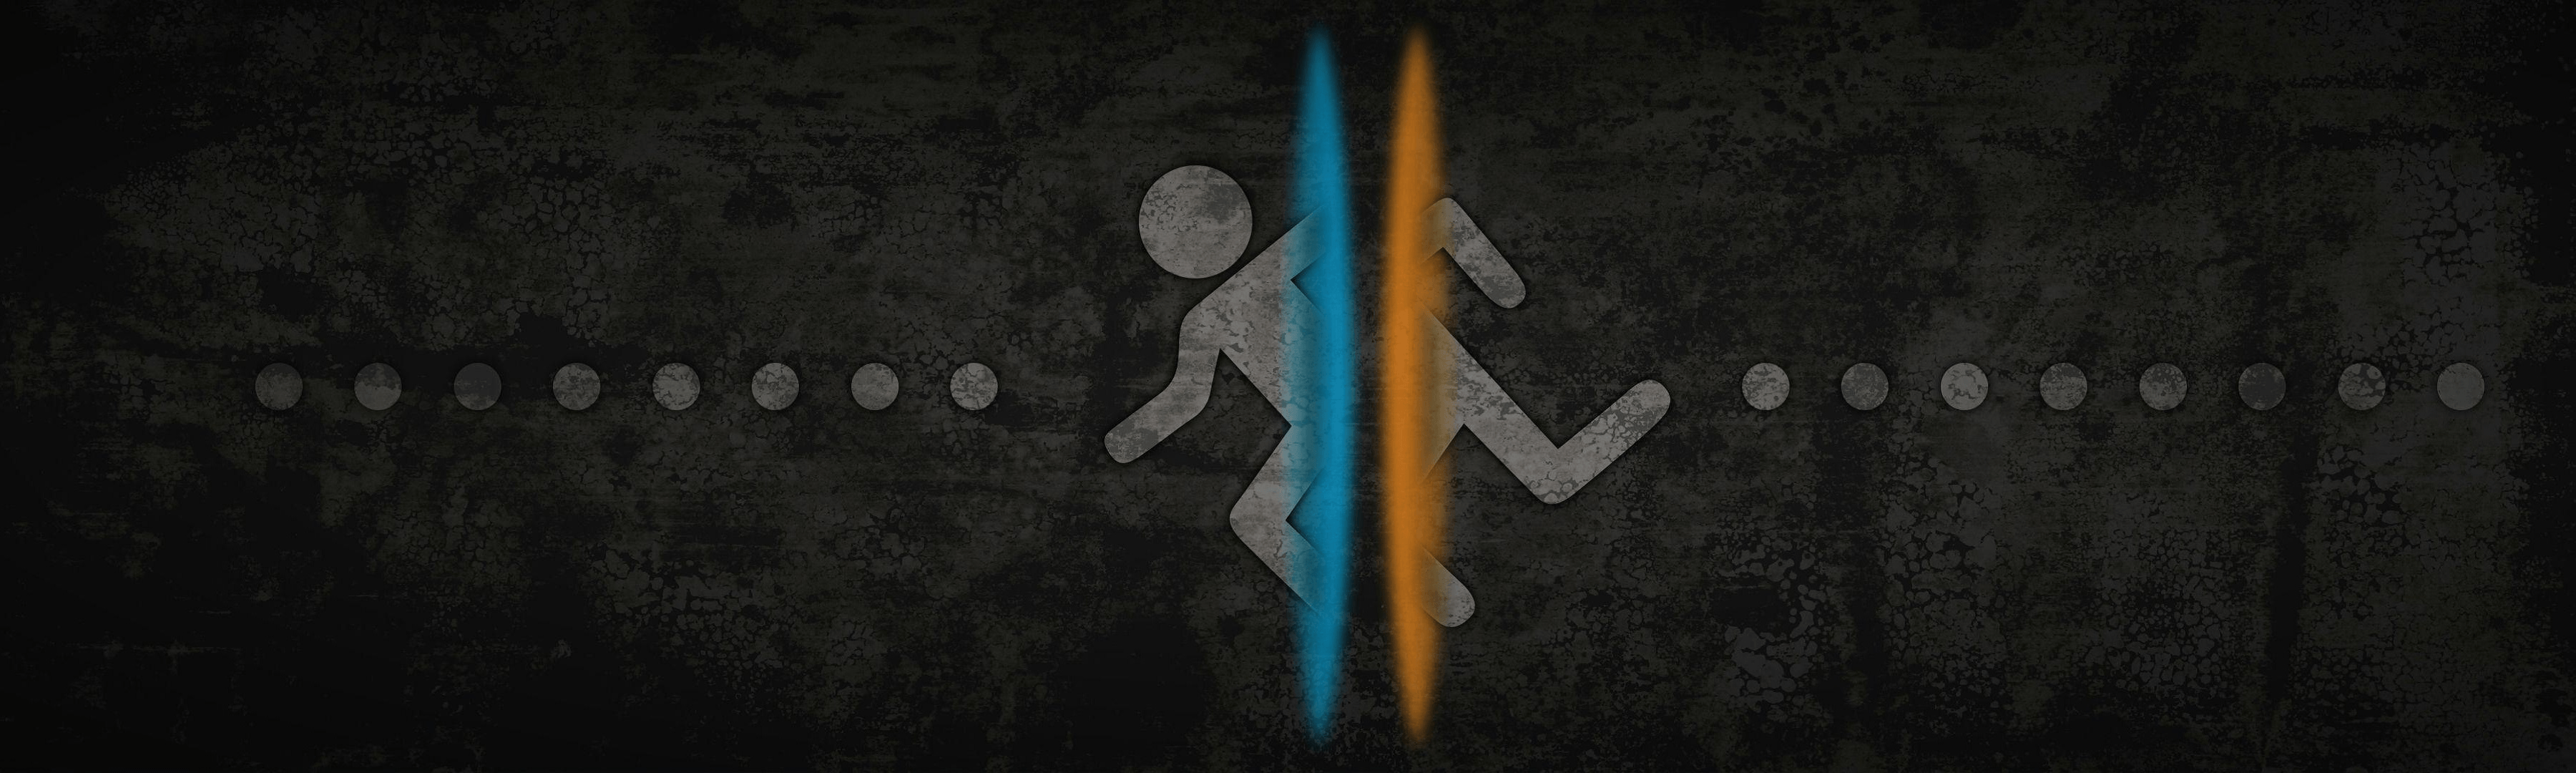 Extended Wallpapers for Dual Monitors